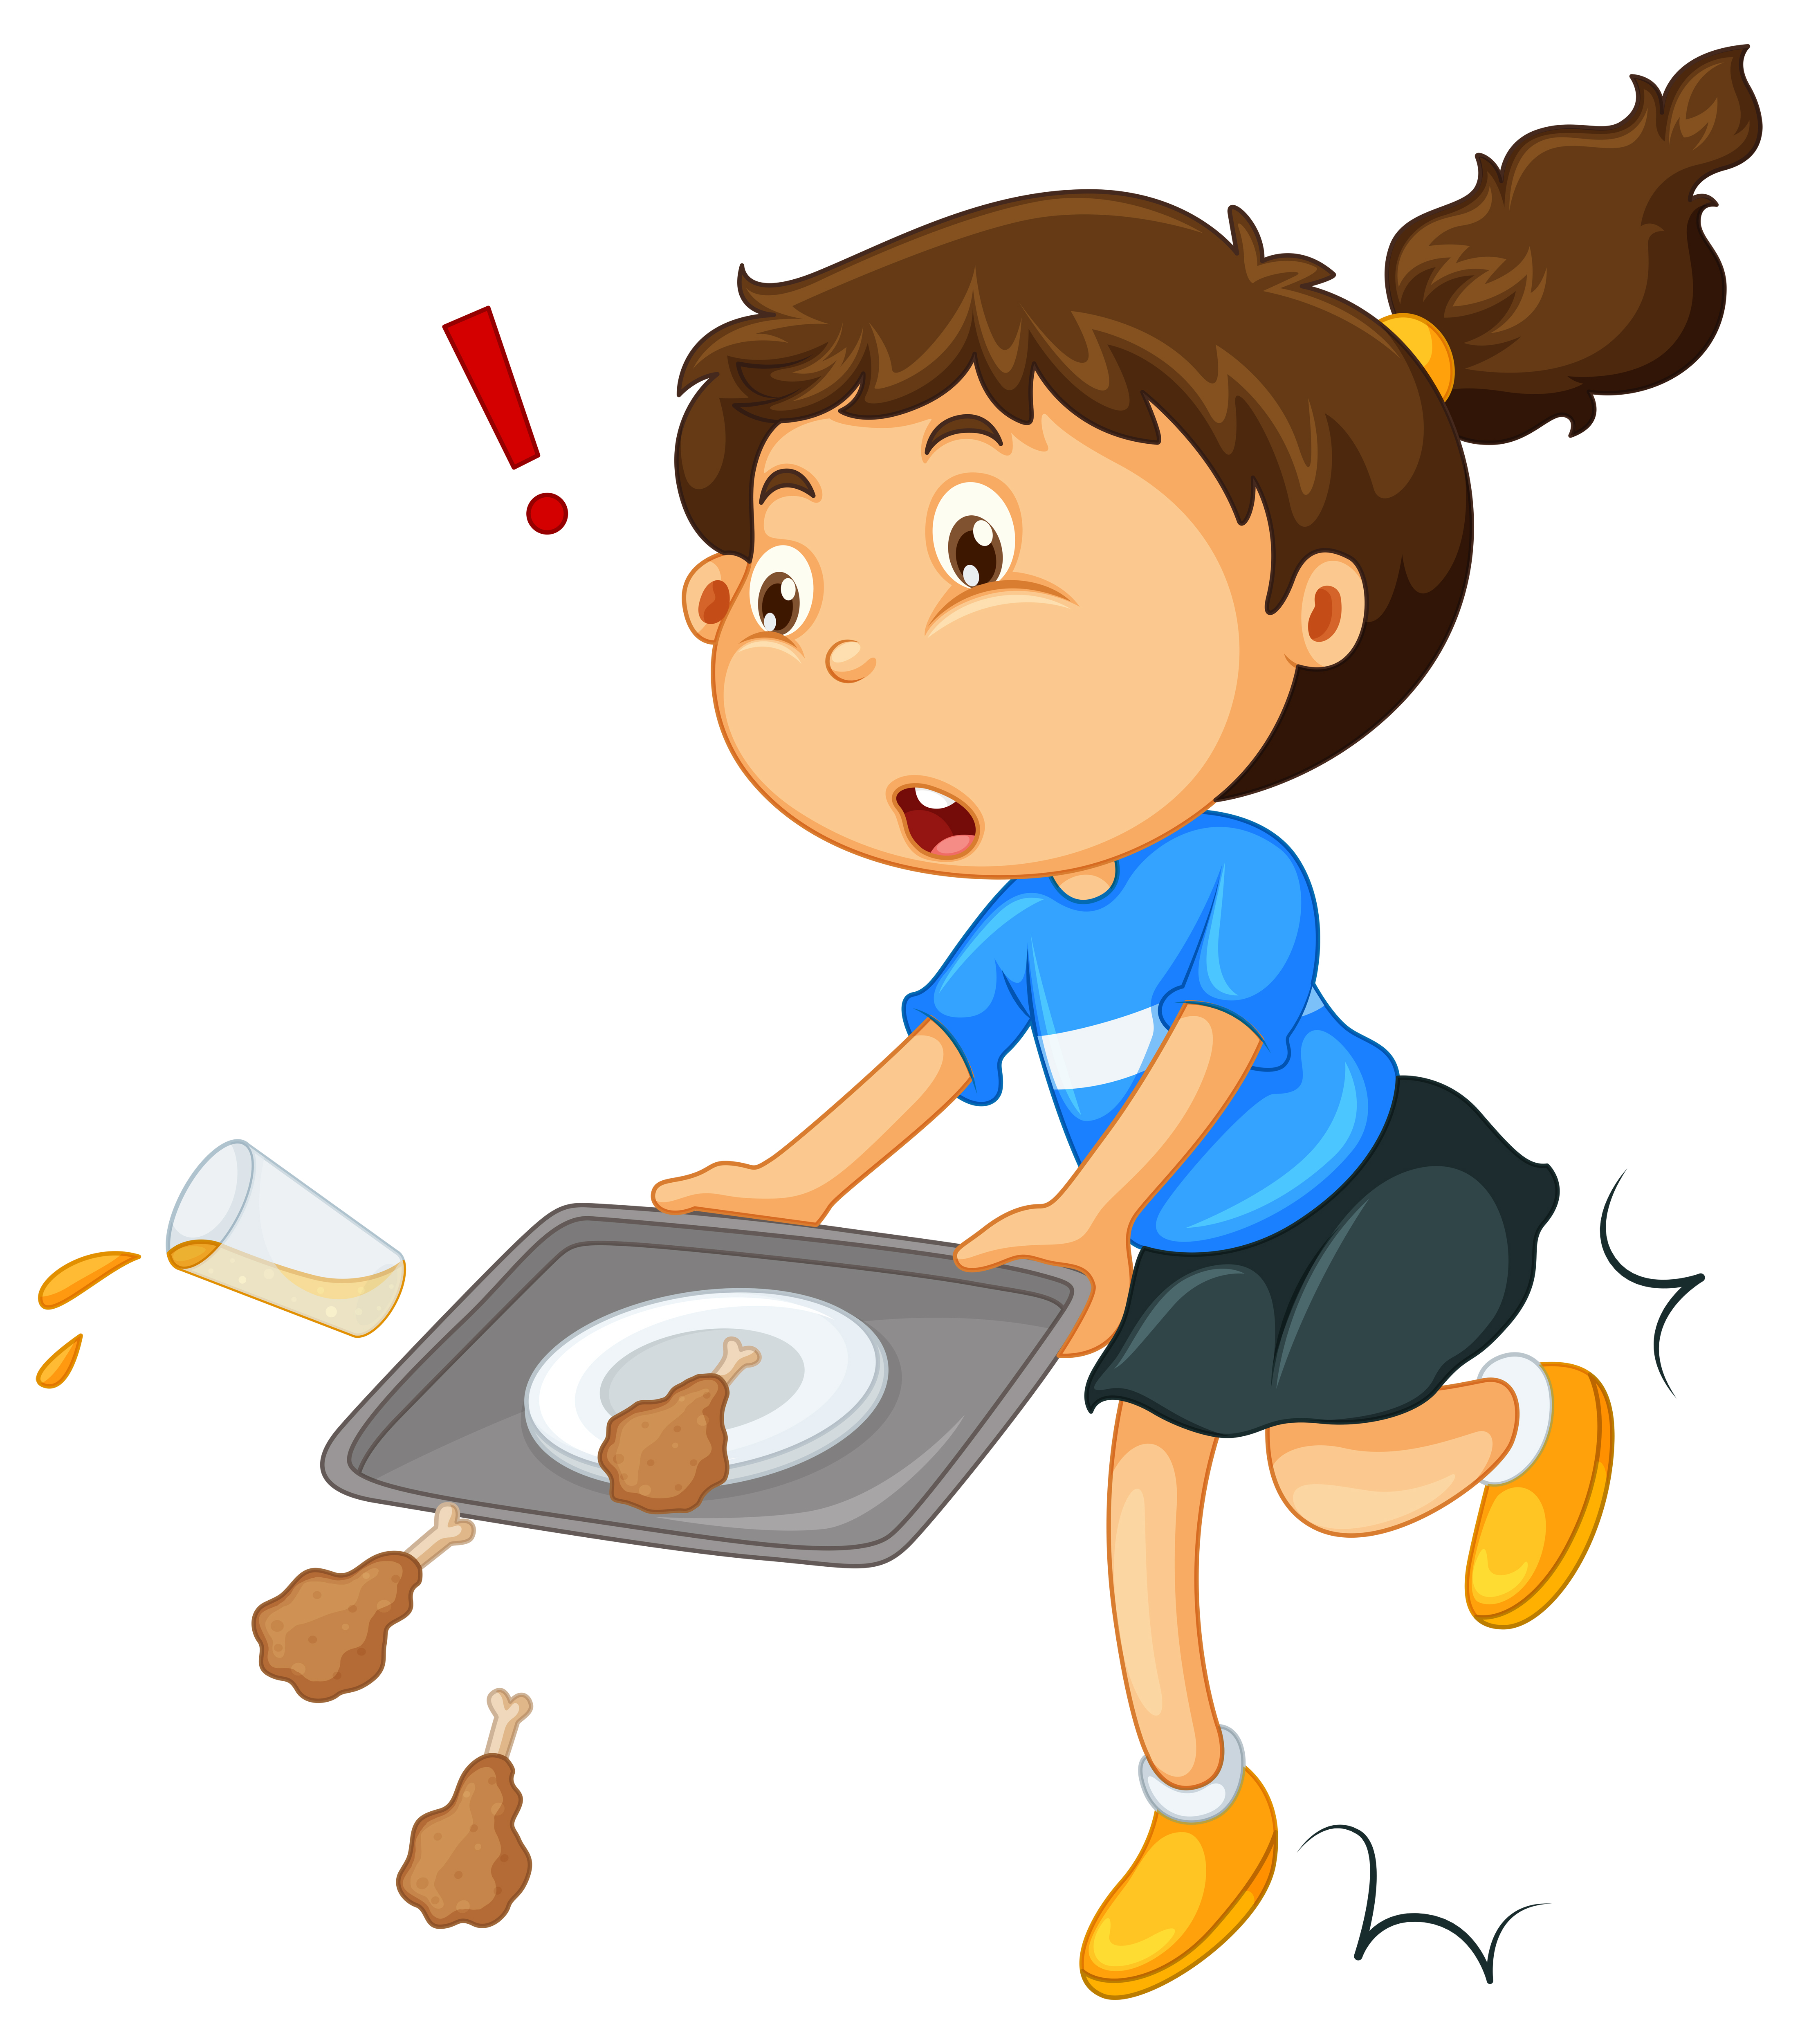 Girl Dropping Food On The Floor Download Free Vectors Clipart